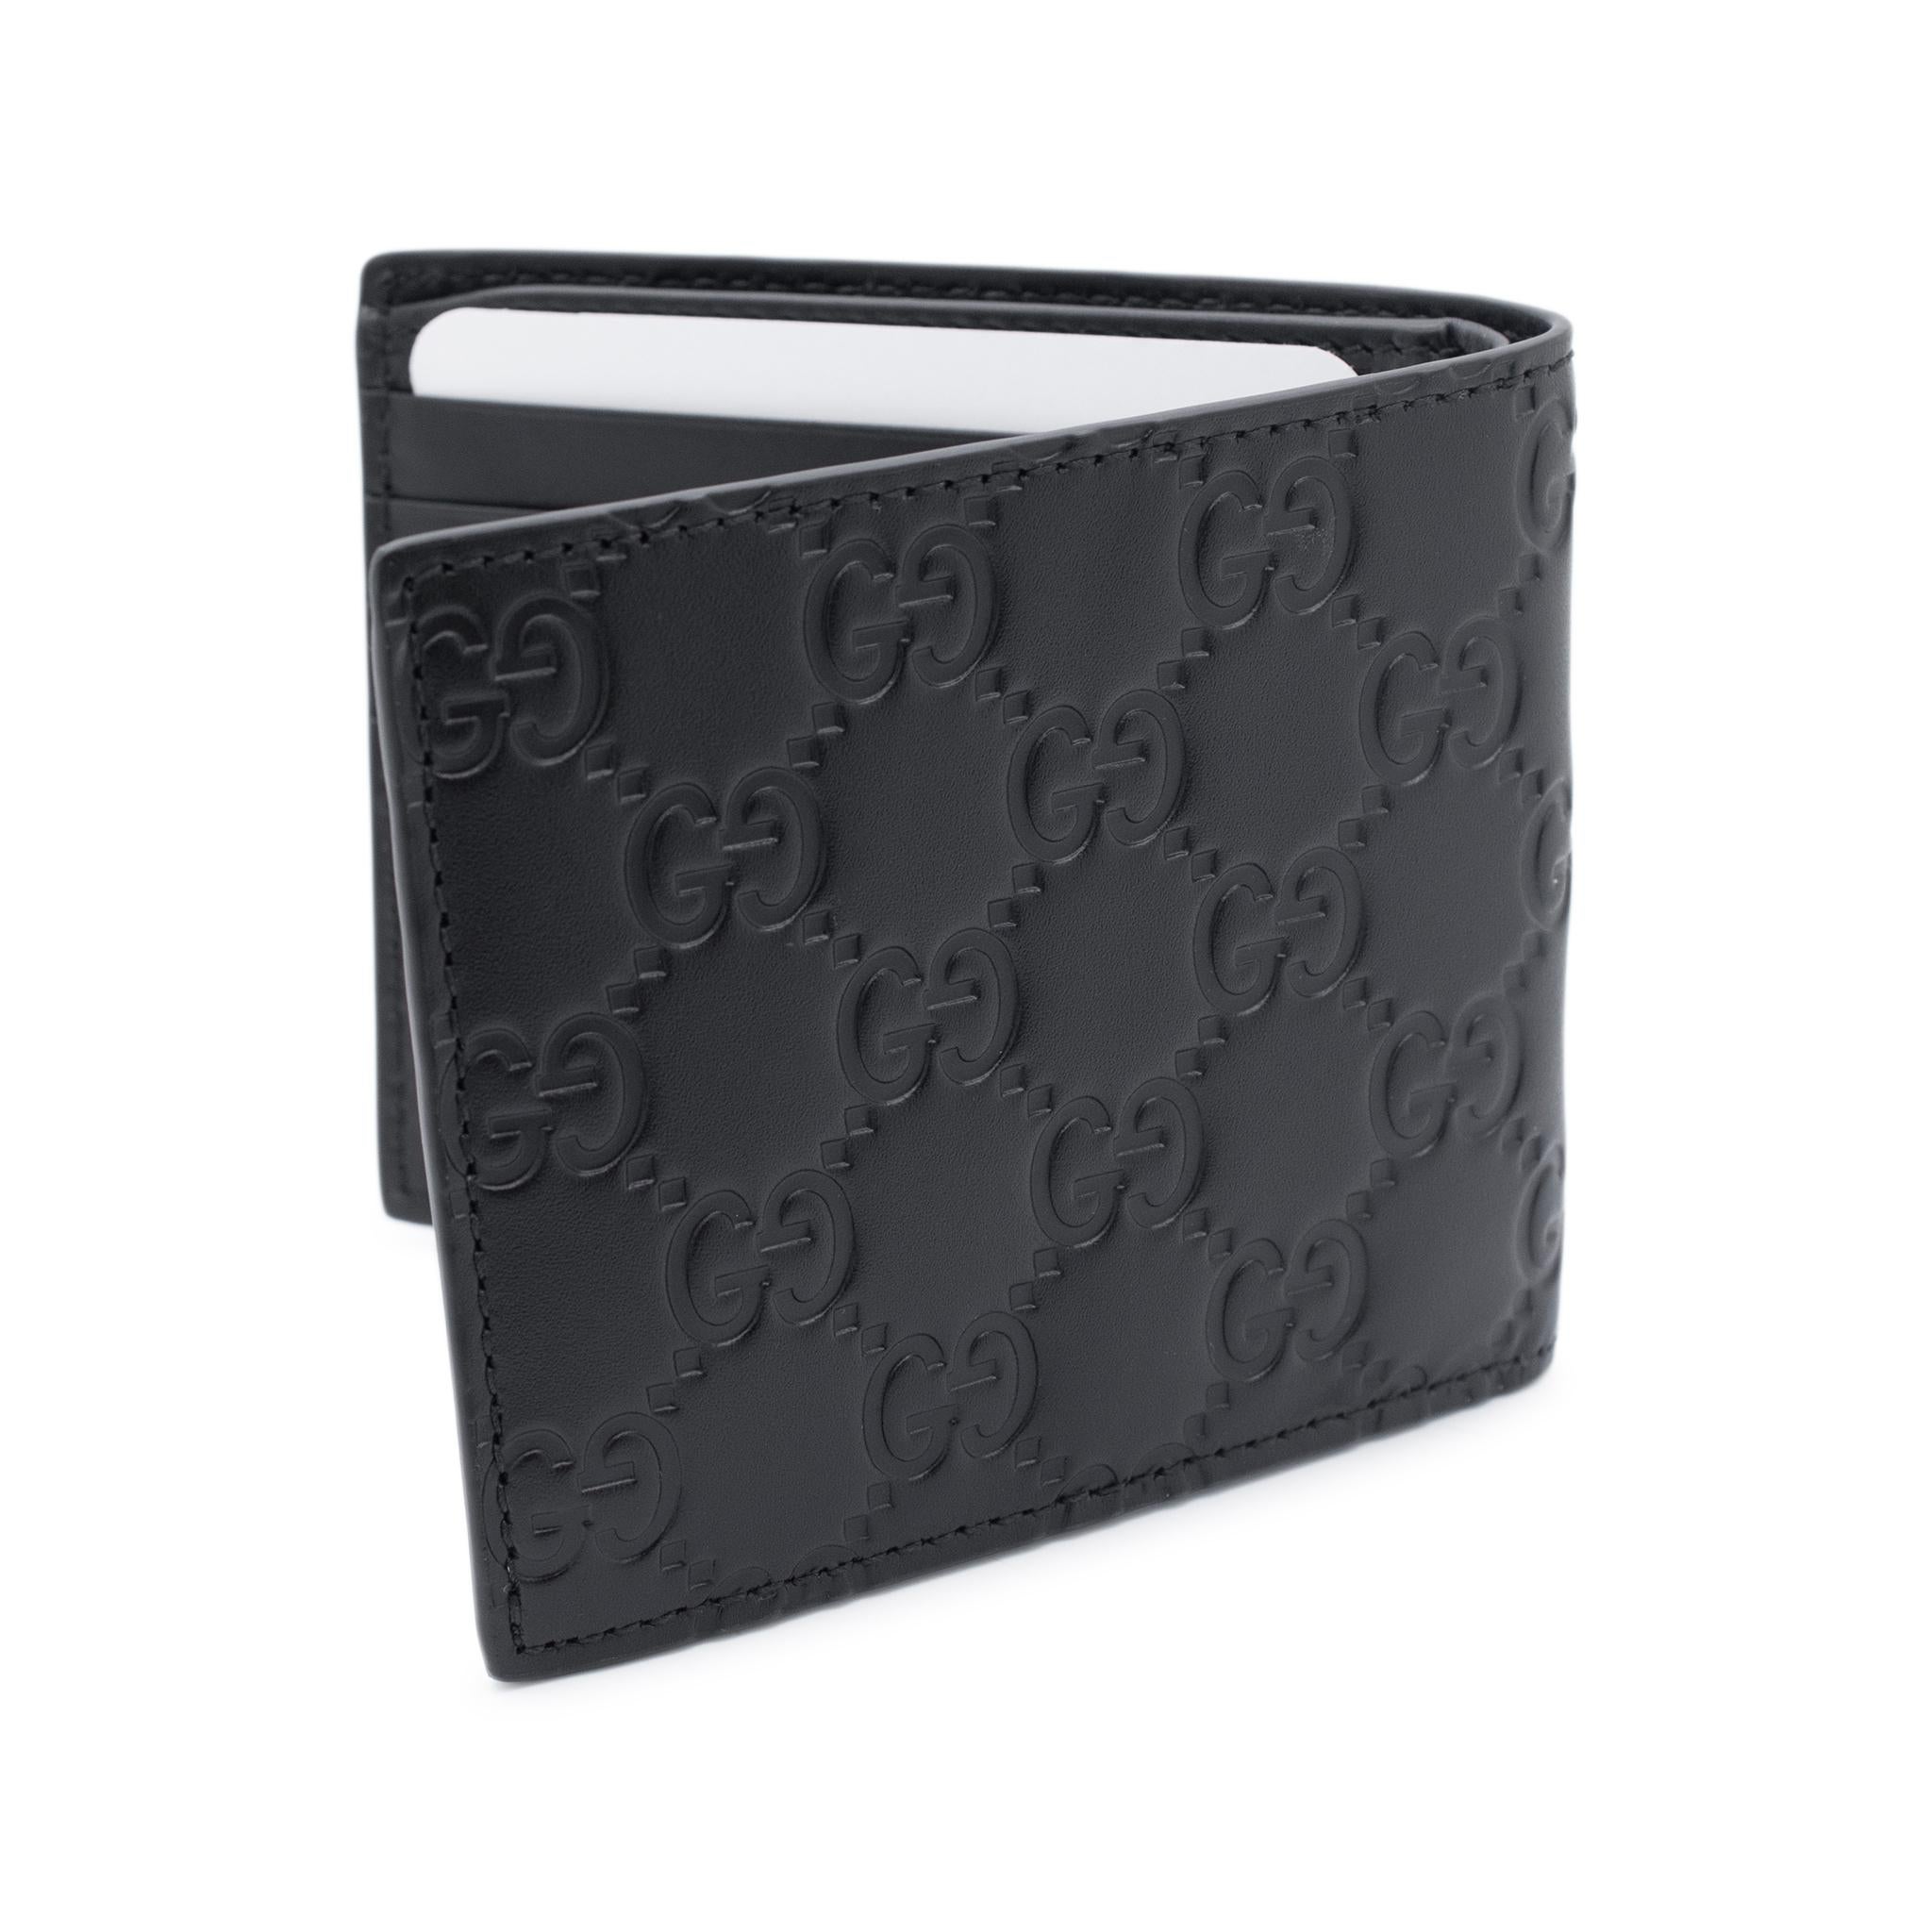 Brand: Gucci

Gender: Unisex

Metal Type: Leather

Width: 4.00 Inches

Height: 3.50 Inches

Depth: 0.50 Inches

Weight: 67.36 Grams

This folded calf leather wallet features the iconic Gucci Signature GG pattern and a sleek black design. Keep your